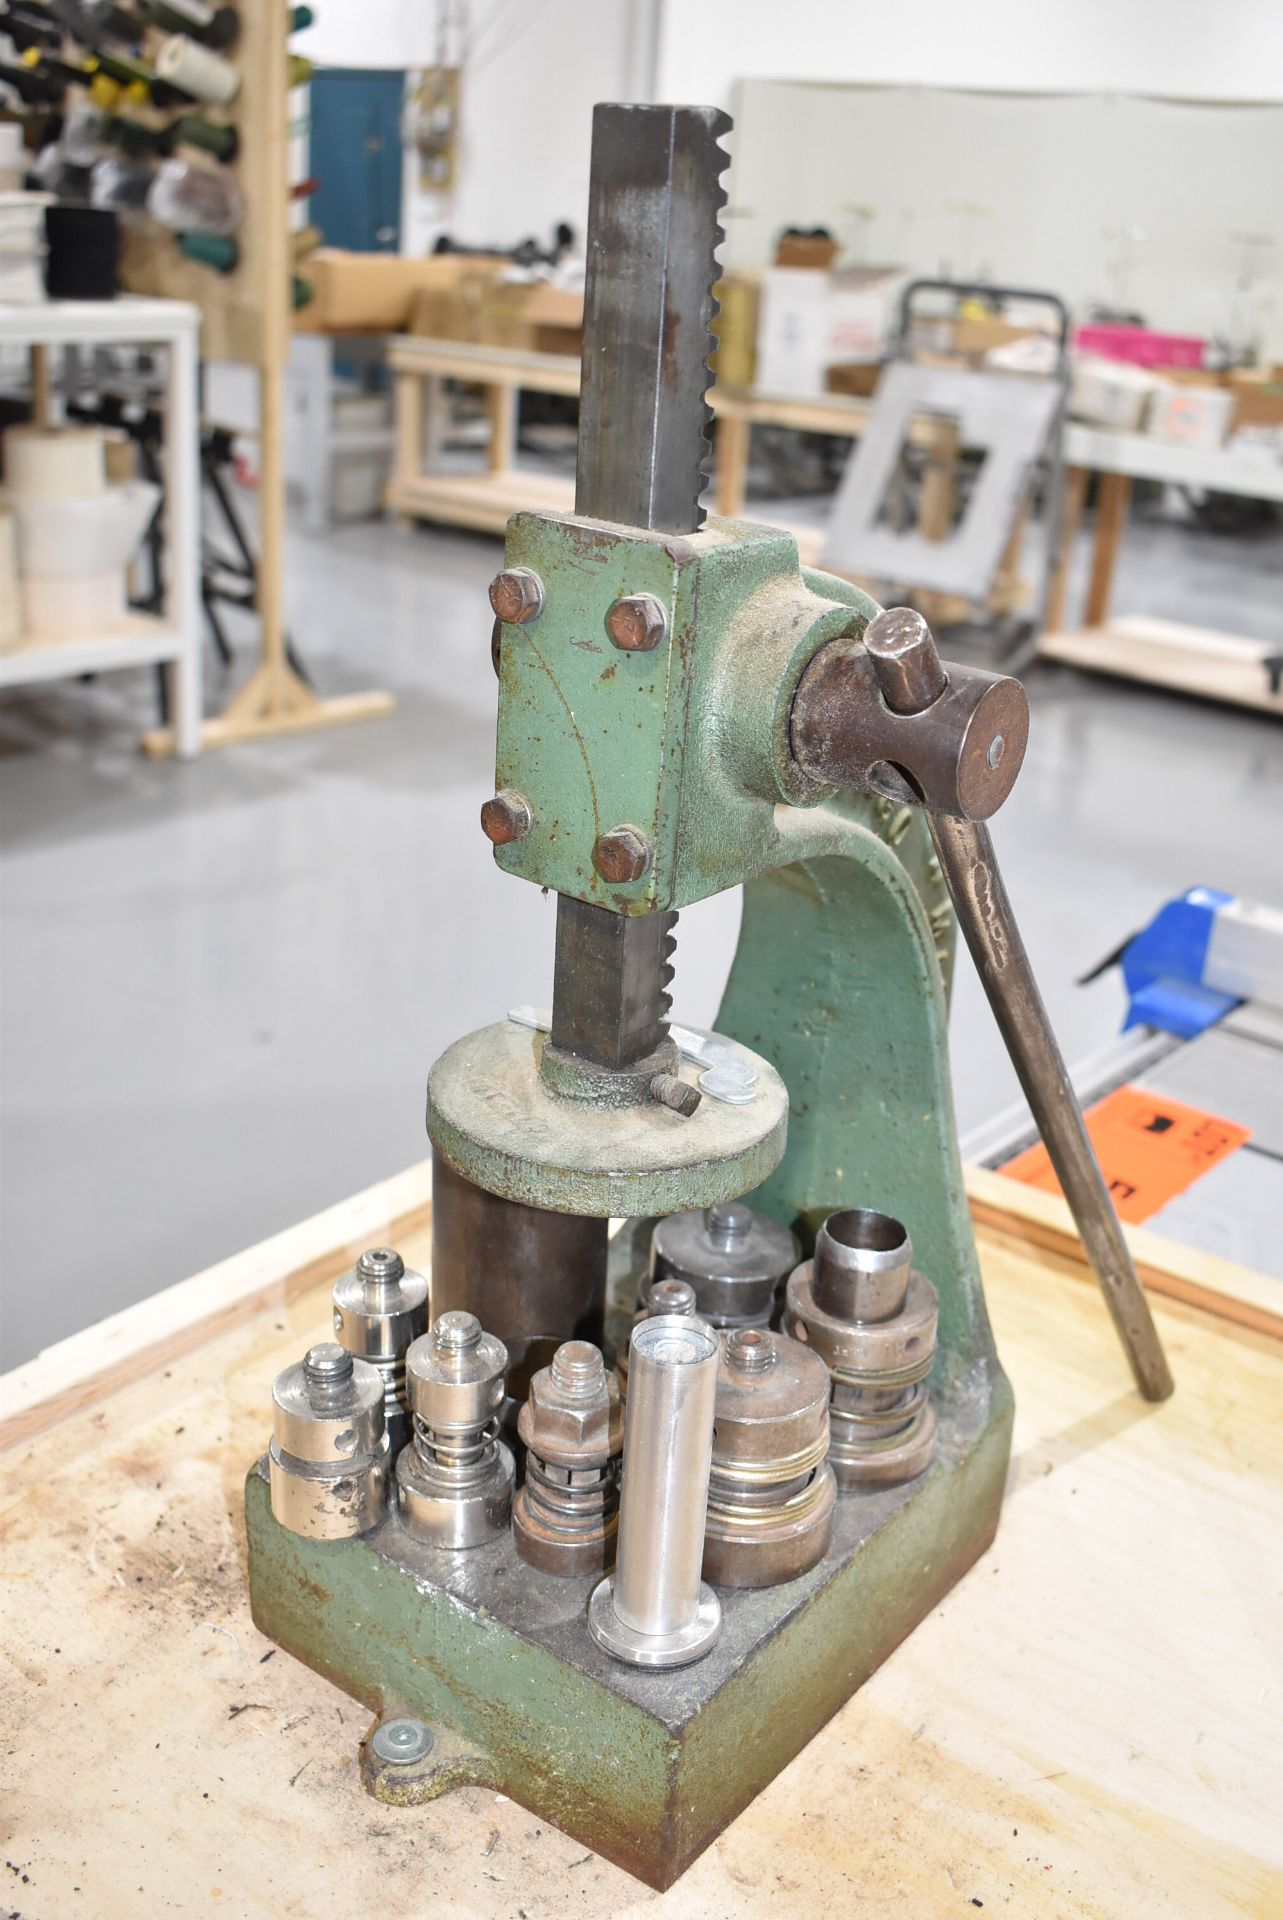 LOT/ HANDY BUTTON MACH CO HANDY NO 2 & NO 11 ARBOR BUTTON PRESSES WITH WOOD STAND - Image 6 of 8